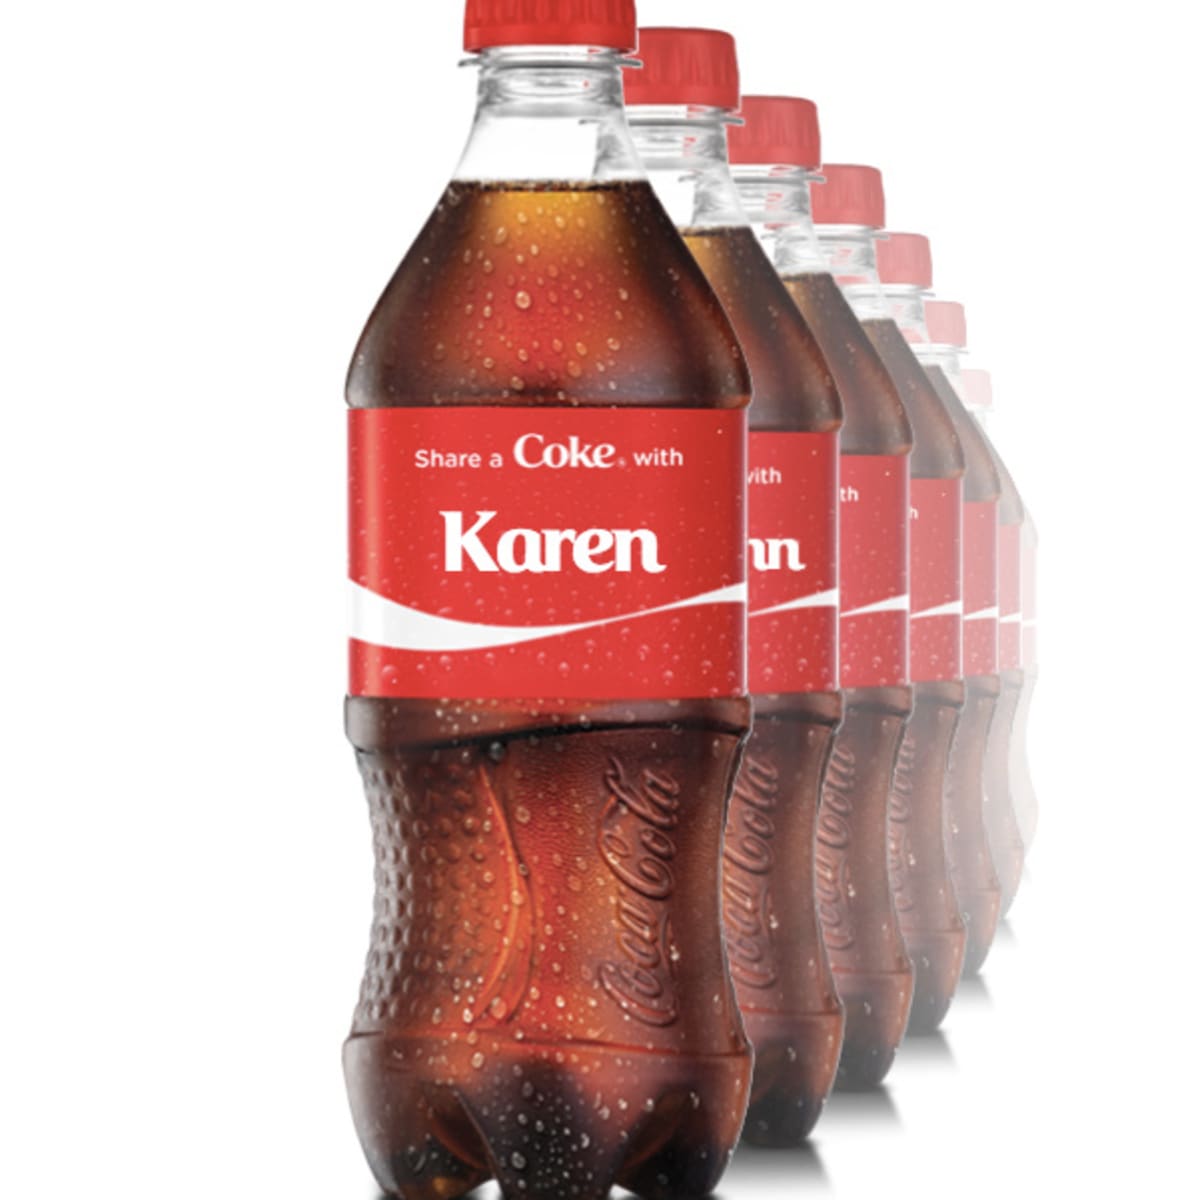 Personalized Coke Labels: Your-Name-Here Soft Drinks Have Arrived